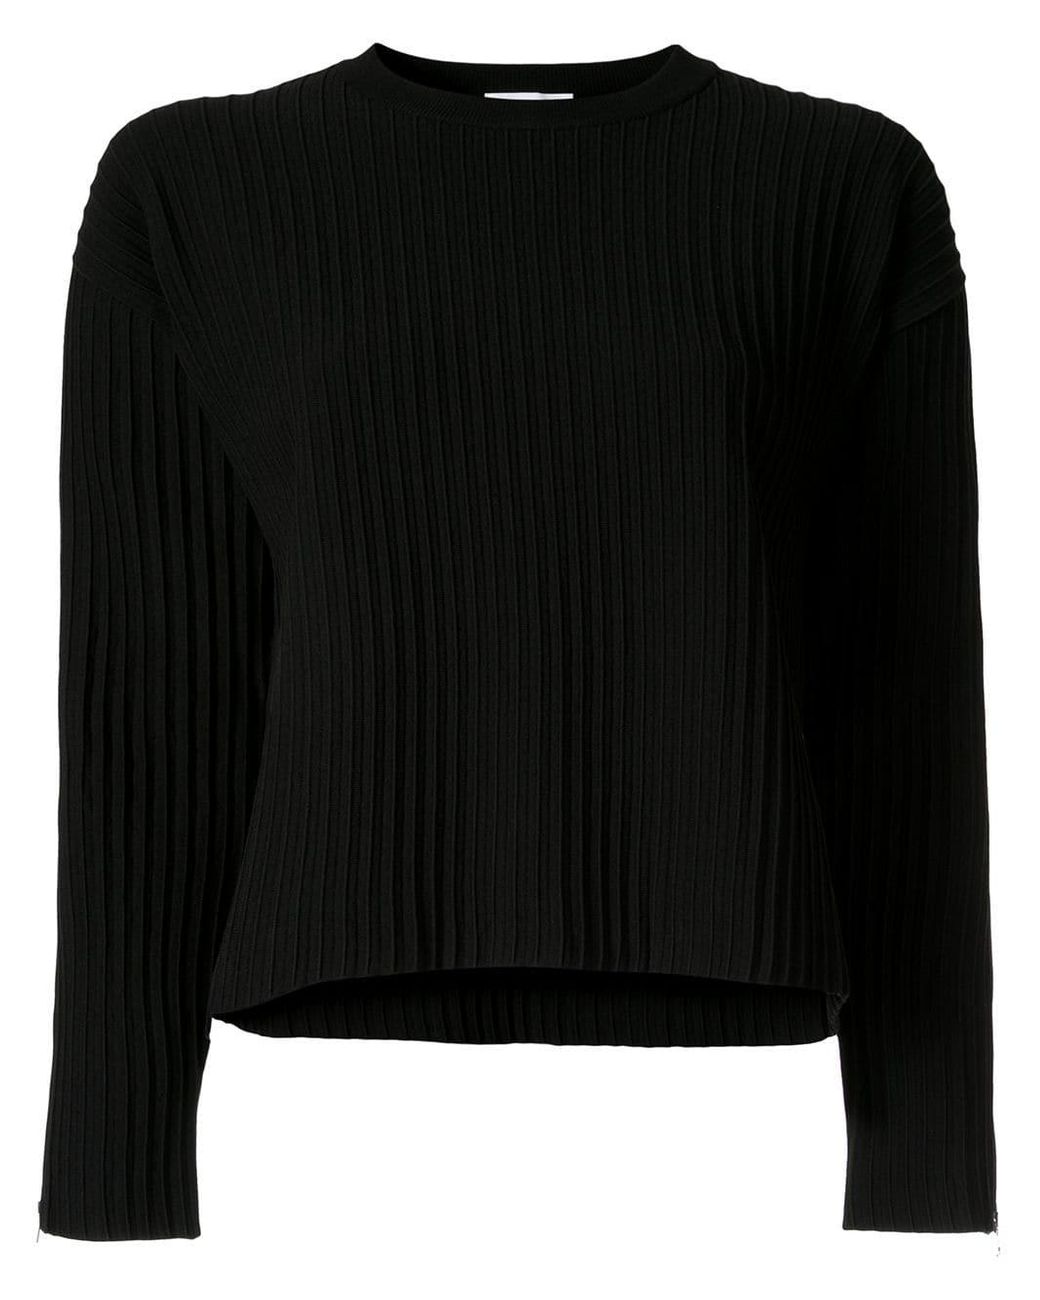 CASASOLA Synthetic Ribbed Knit Sweater in Black - Lyst